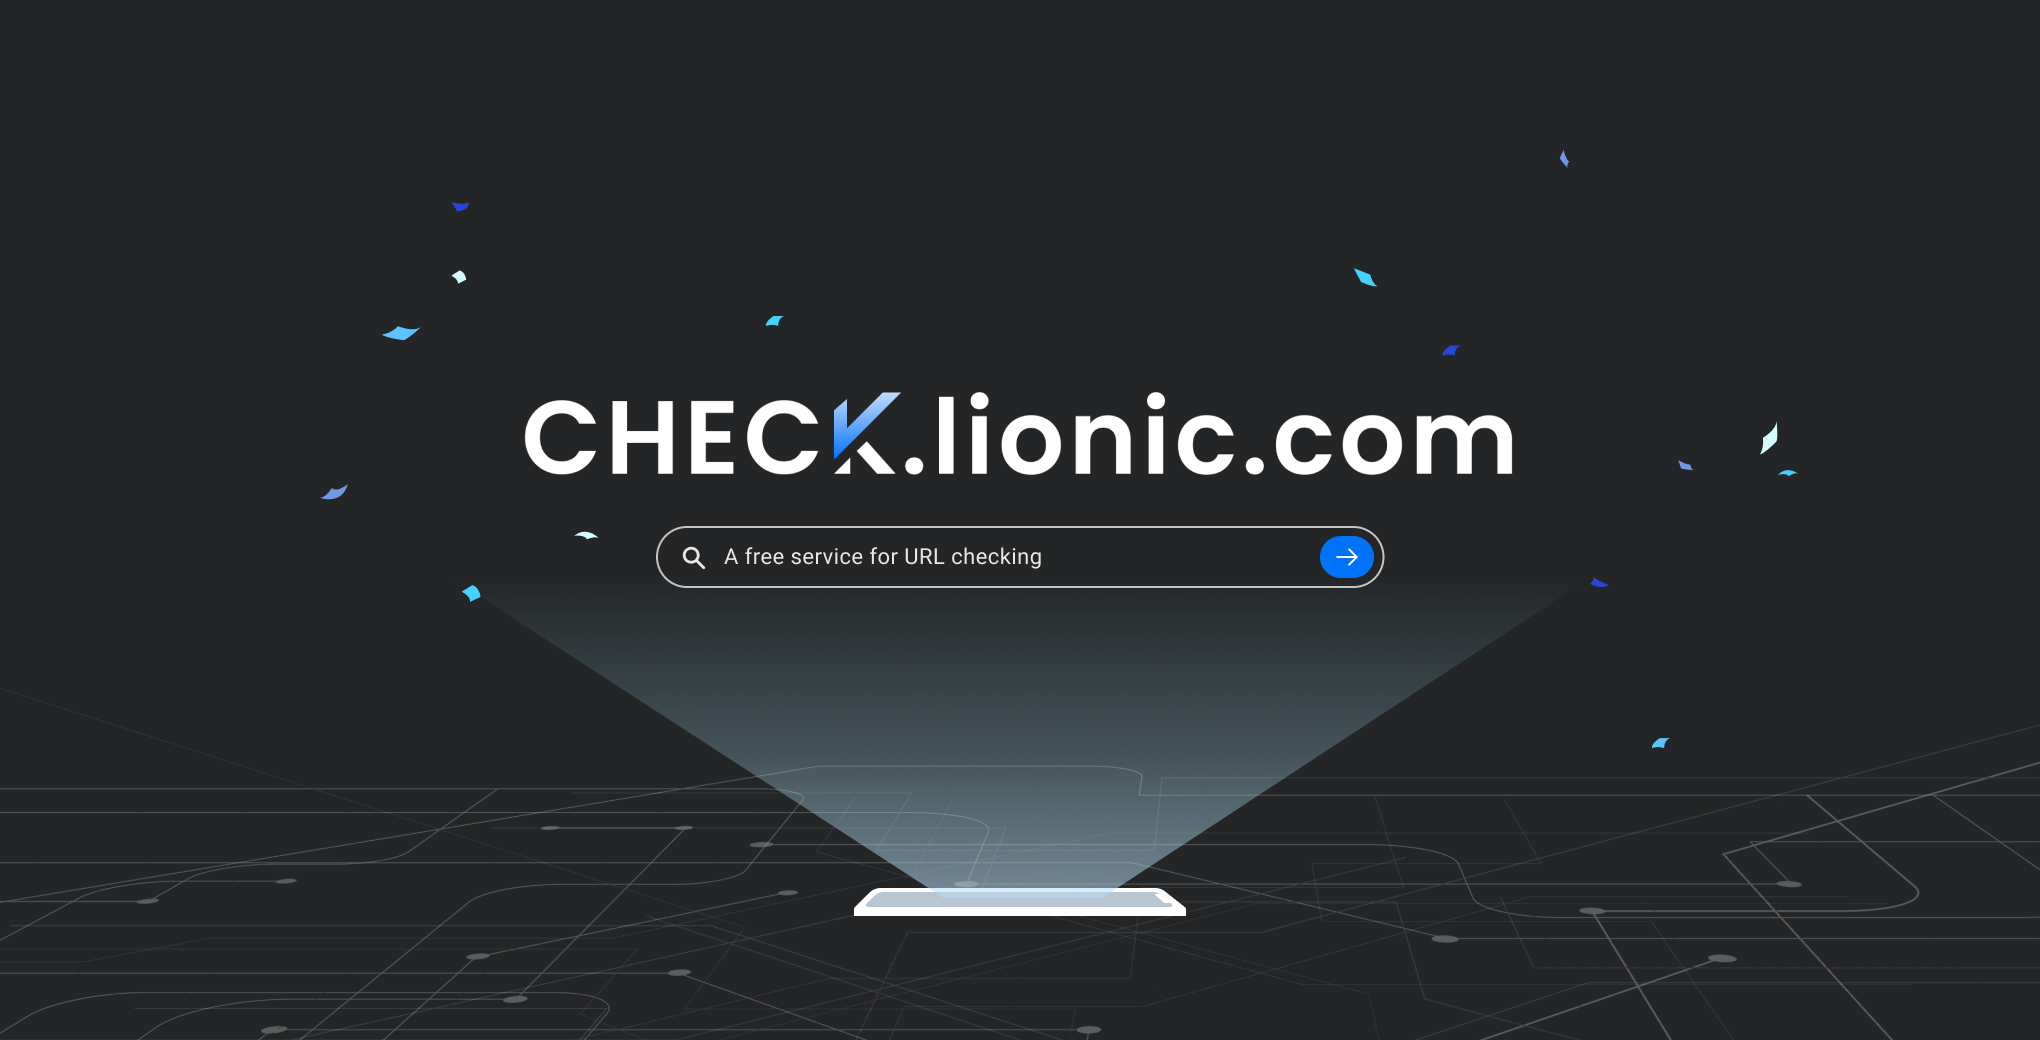 Lionic Launches Free URL Check Service for Malicious Websites and Web Content Categories